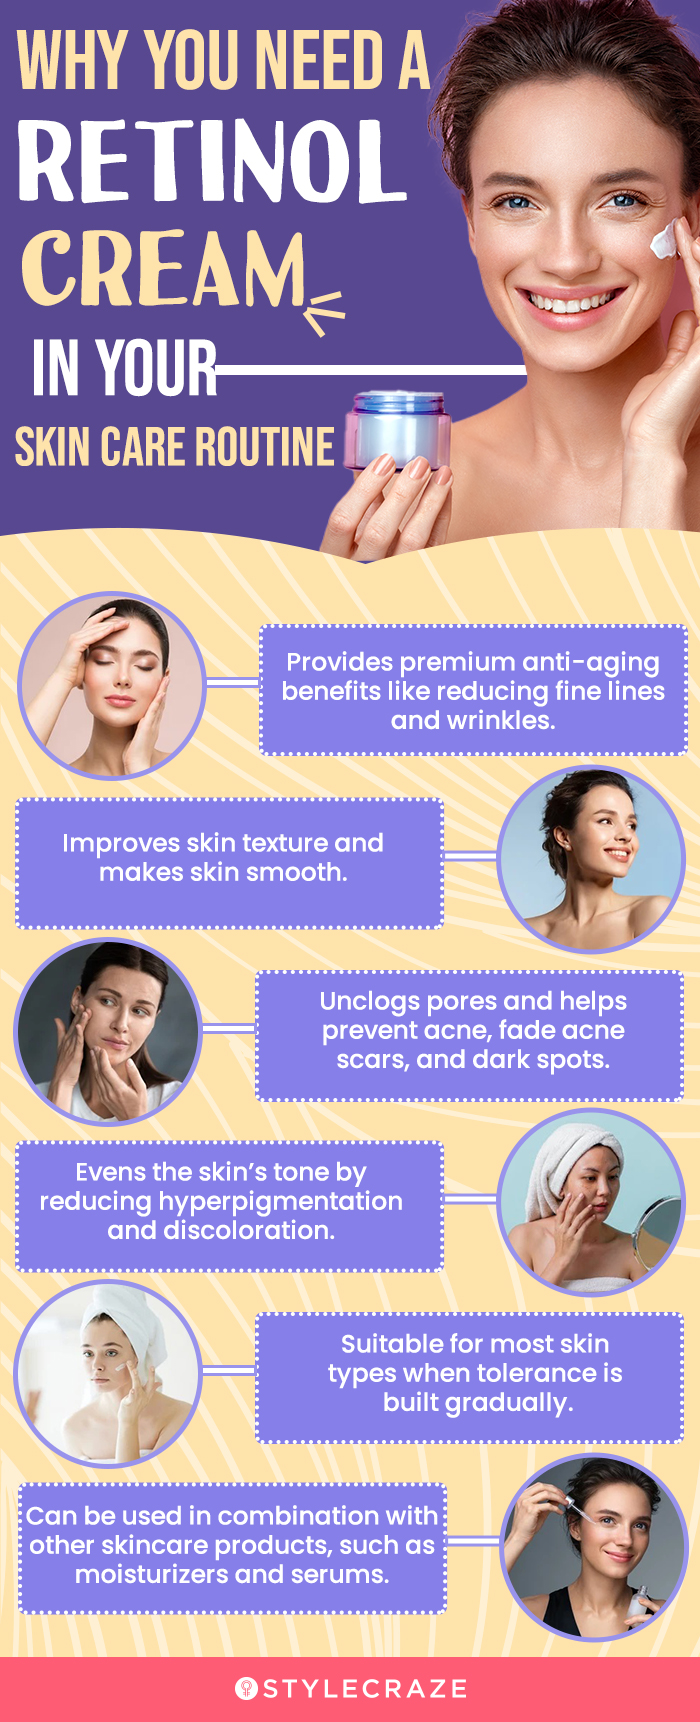 Why You Need A Retinol Cream In Your Skin Care Routine (infographic)